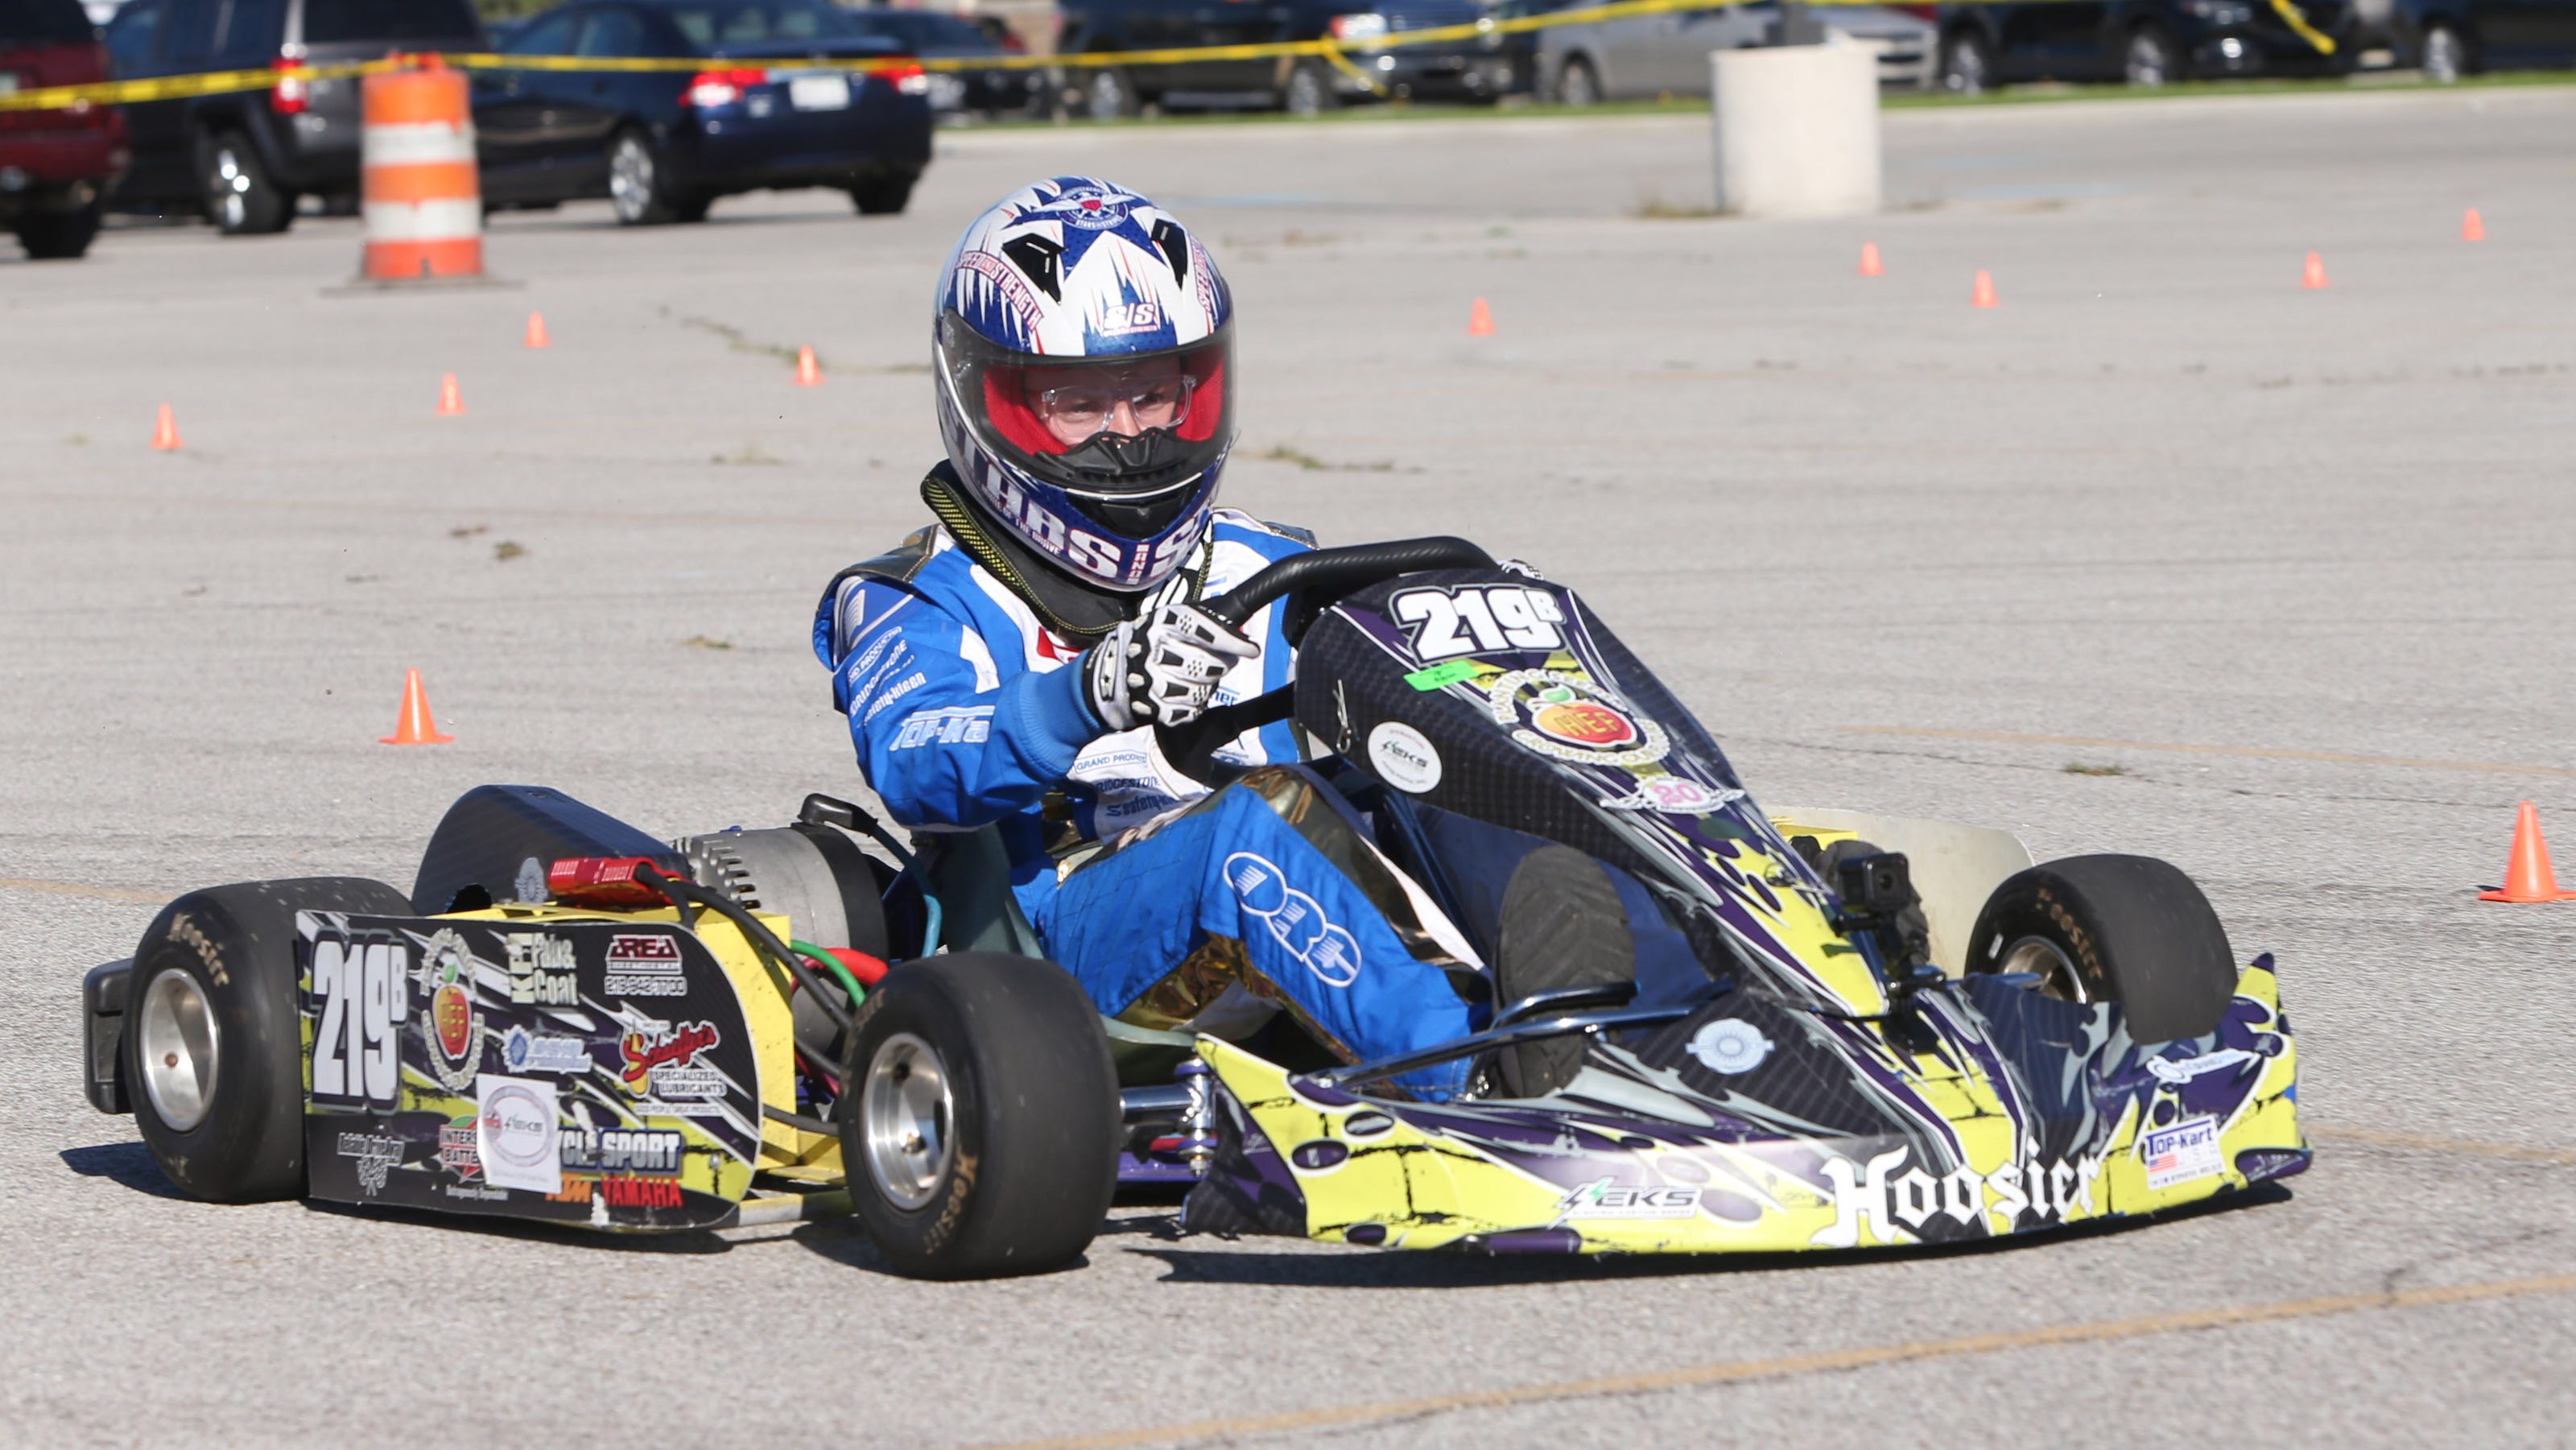 Purdue Motorsports holds 'Test and Tune' event in South Bend for high school go-kart teams